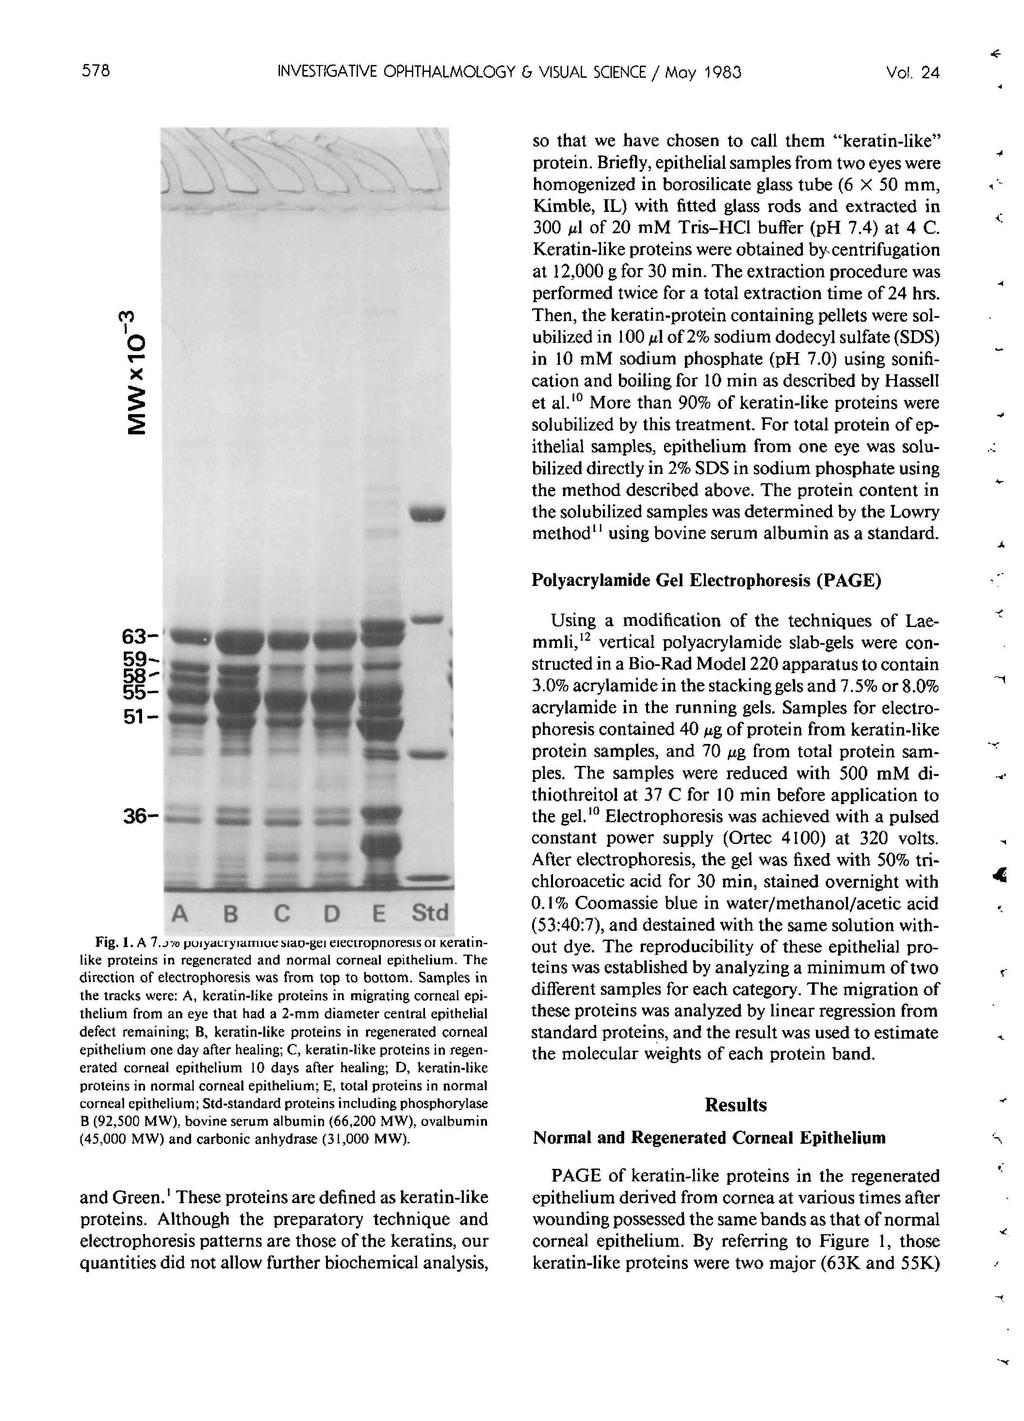 578 INVESTIGATIVE OPHTHALMOLOGY 6 VISUAL SCIENCE / Moy 1983 Vol. 24 so that we have chosen to call them "keratin-like" protein.